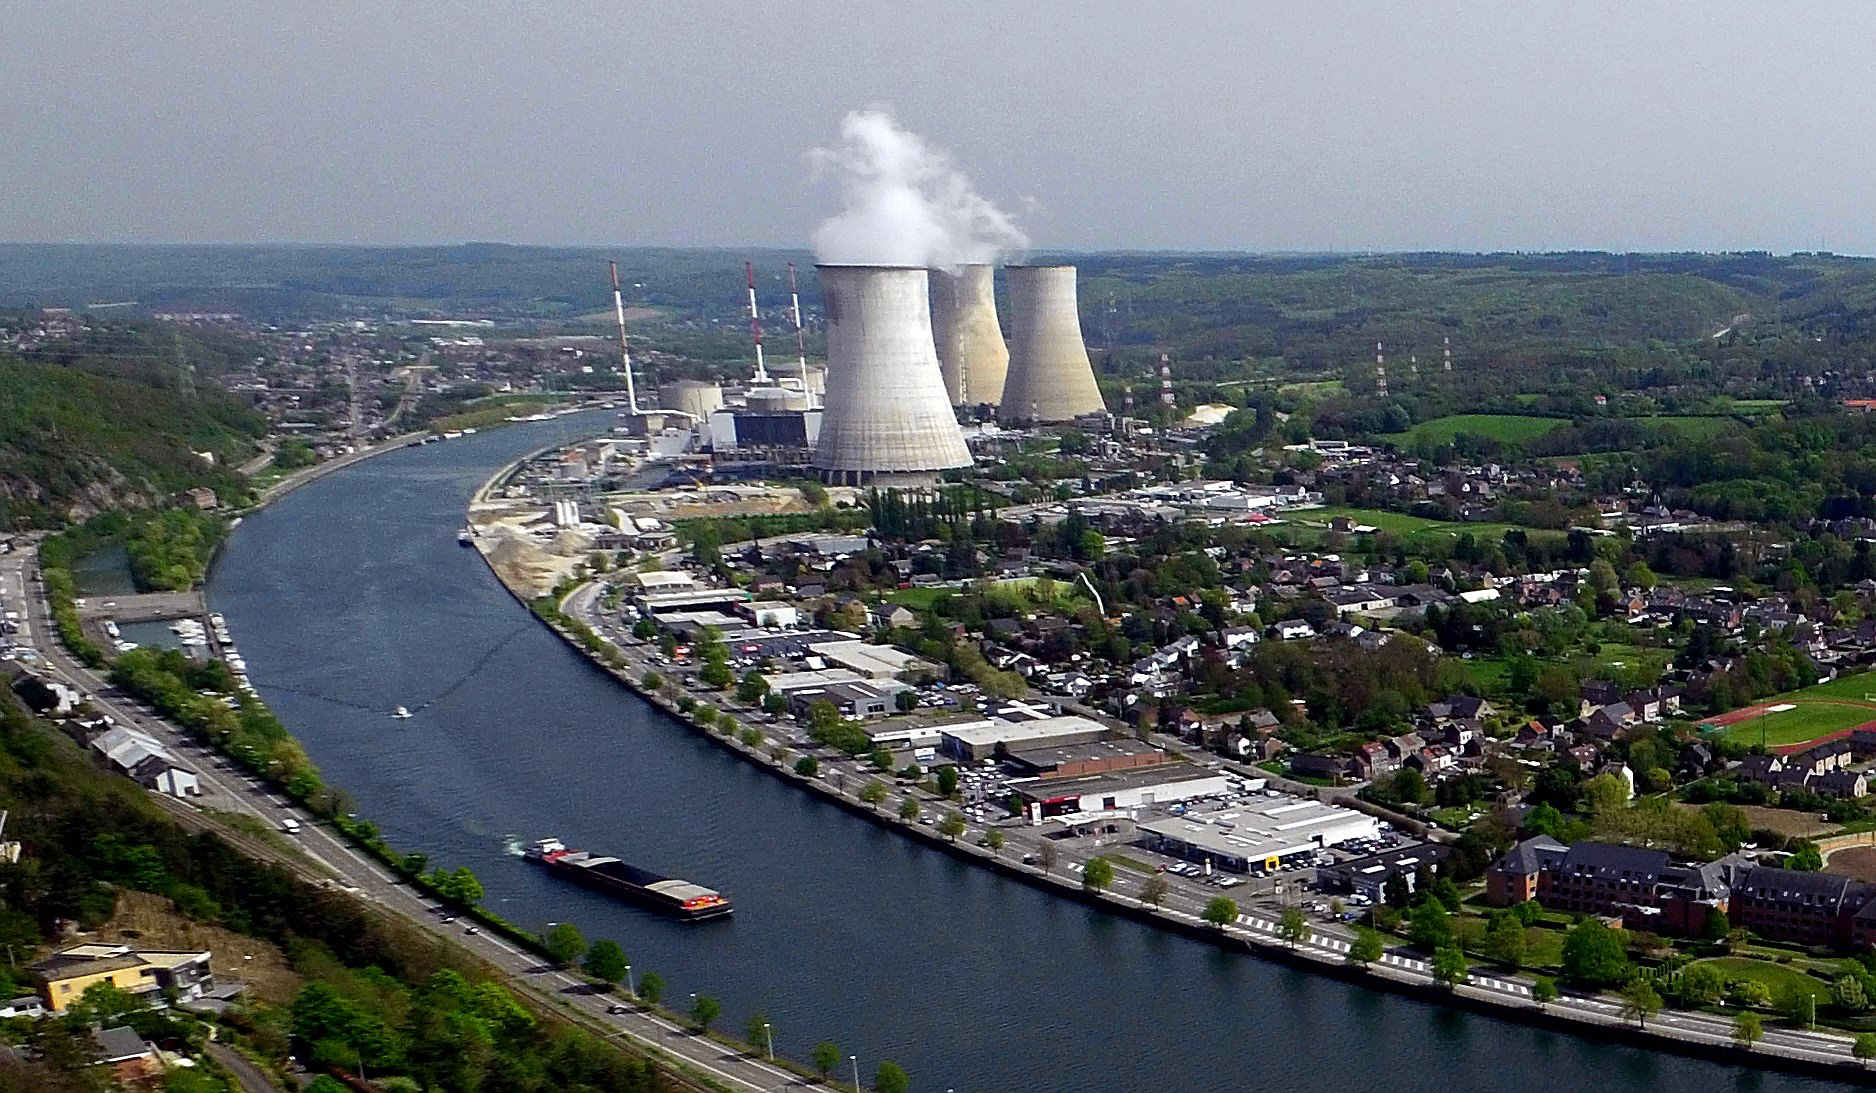 ‘Keeping nuclear power plants open saves €100 million a year’